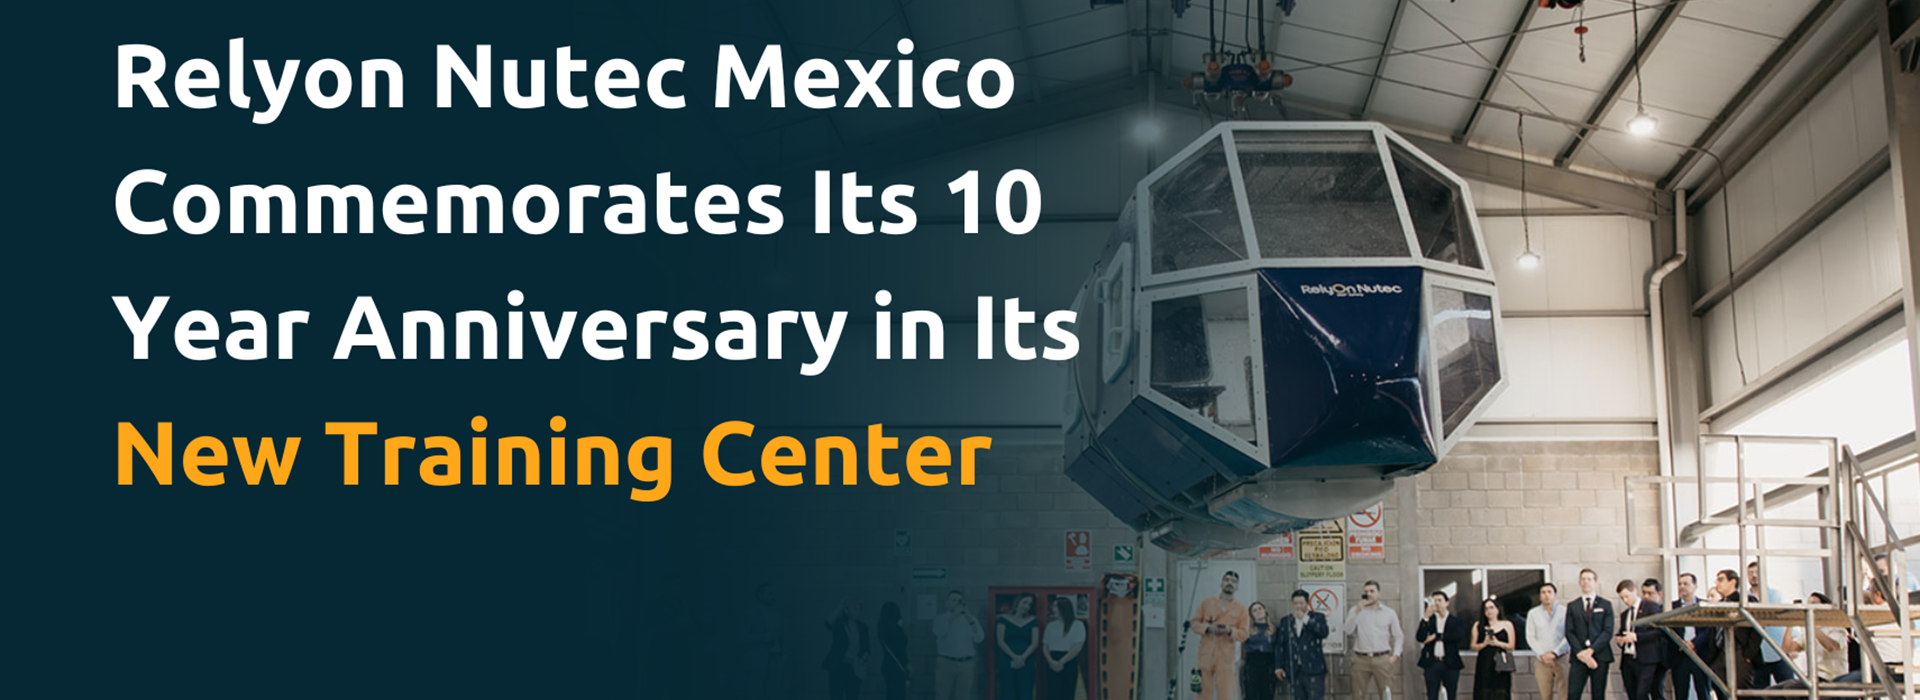 Article Thumbnail Mexico's 10 Year Anniversary